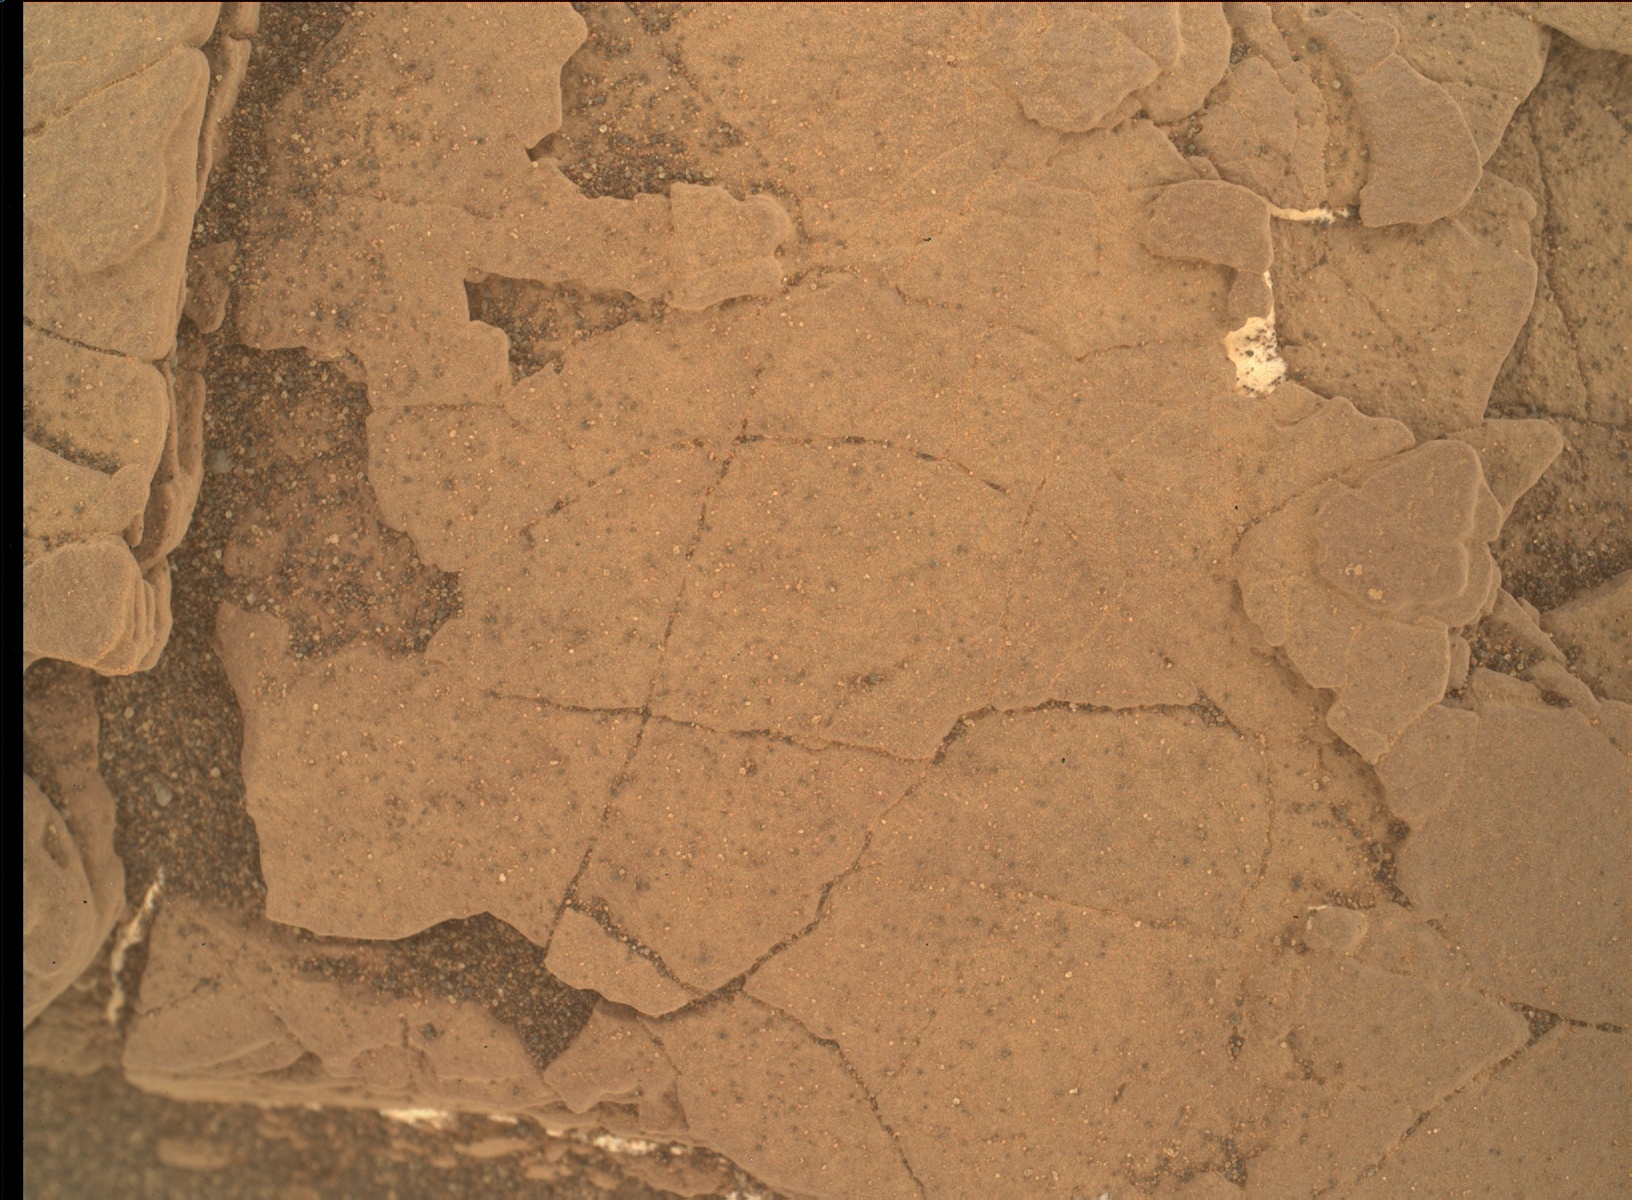 Nasa's Mars rover Curiosity acquired this image using its Mars Hand Lens Imager (MAHLI) on Sol 2463